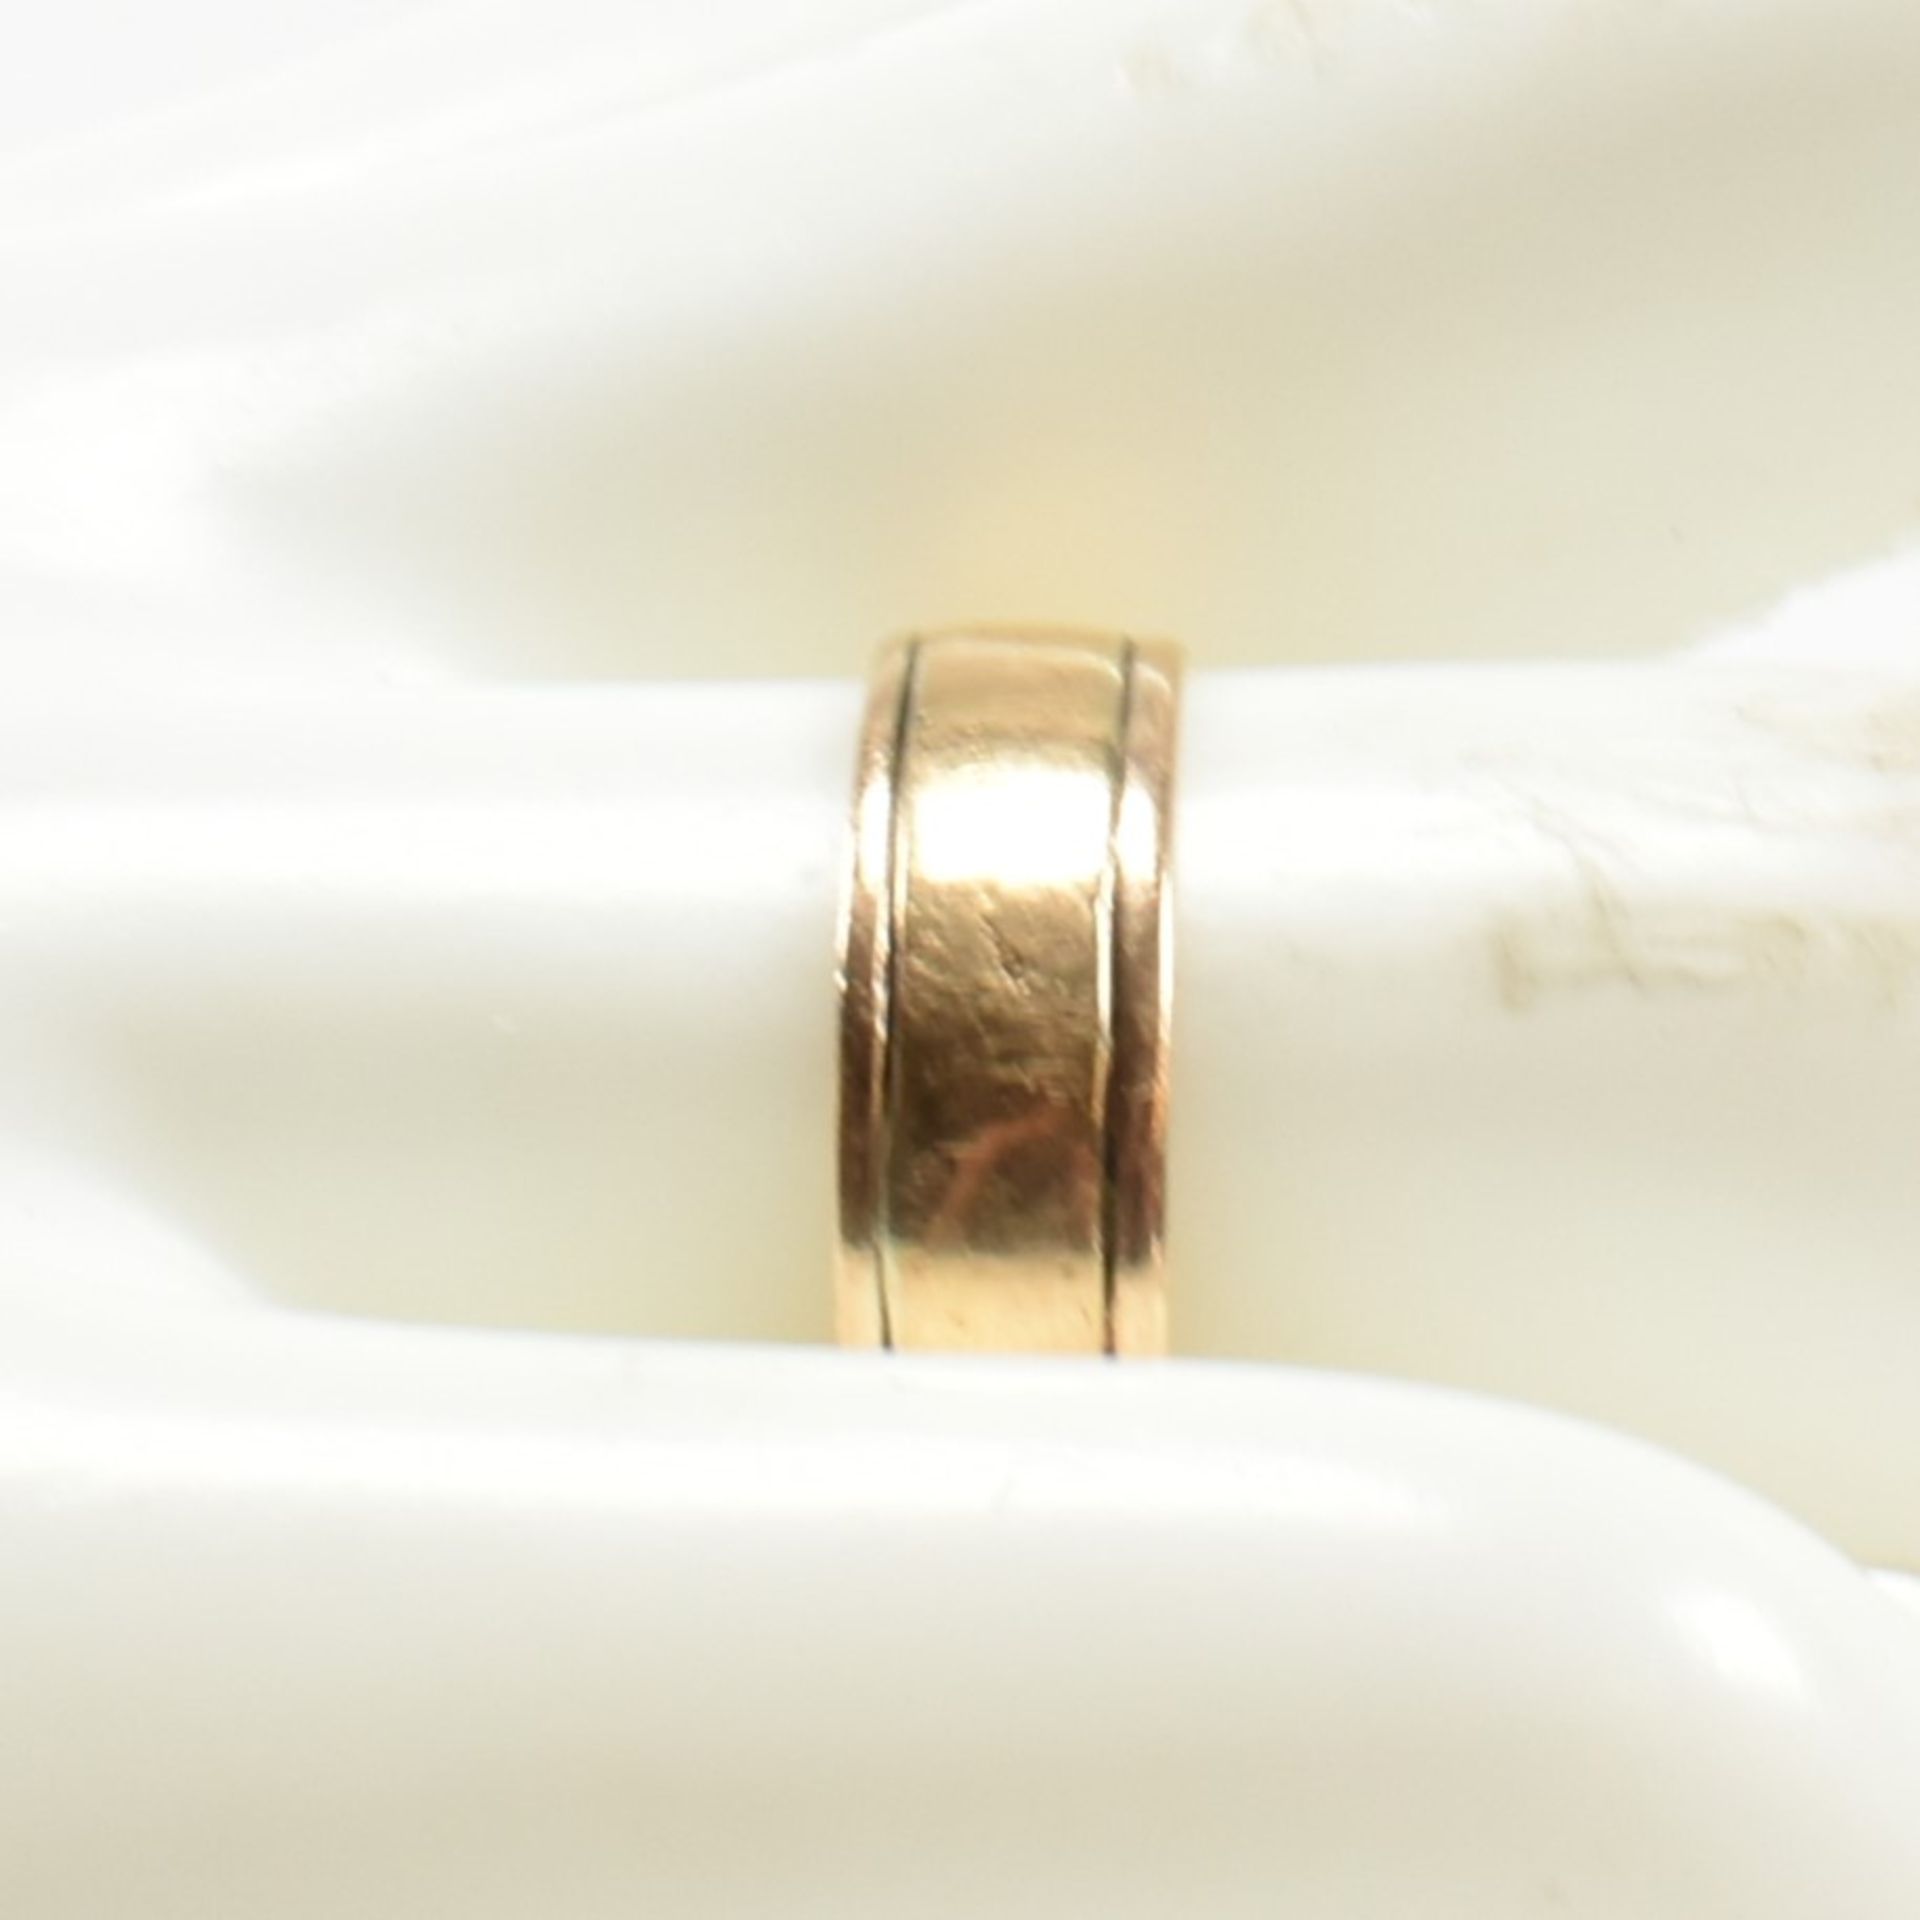 VICTORIAN HALLMARKED 18CT GOLD BAND RING - Image 4 of 4